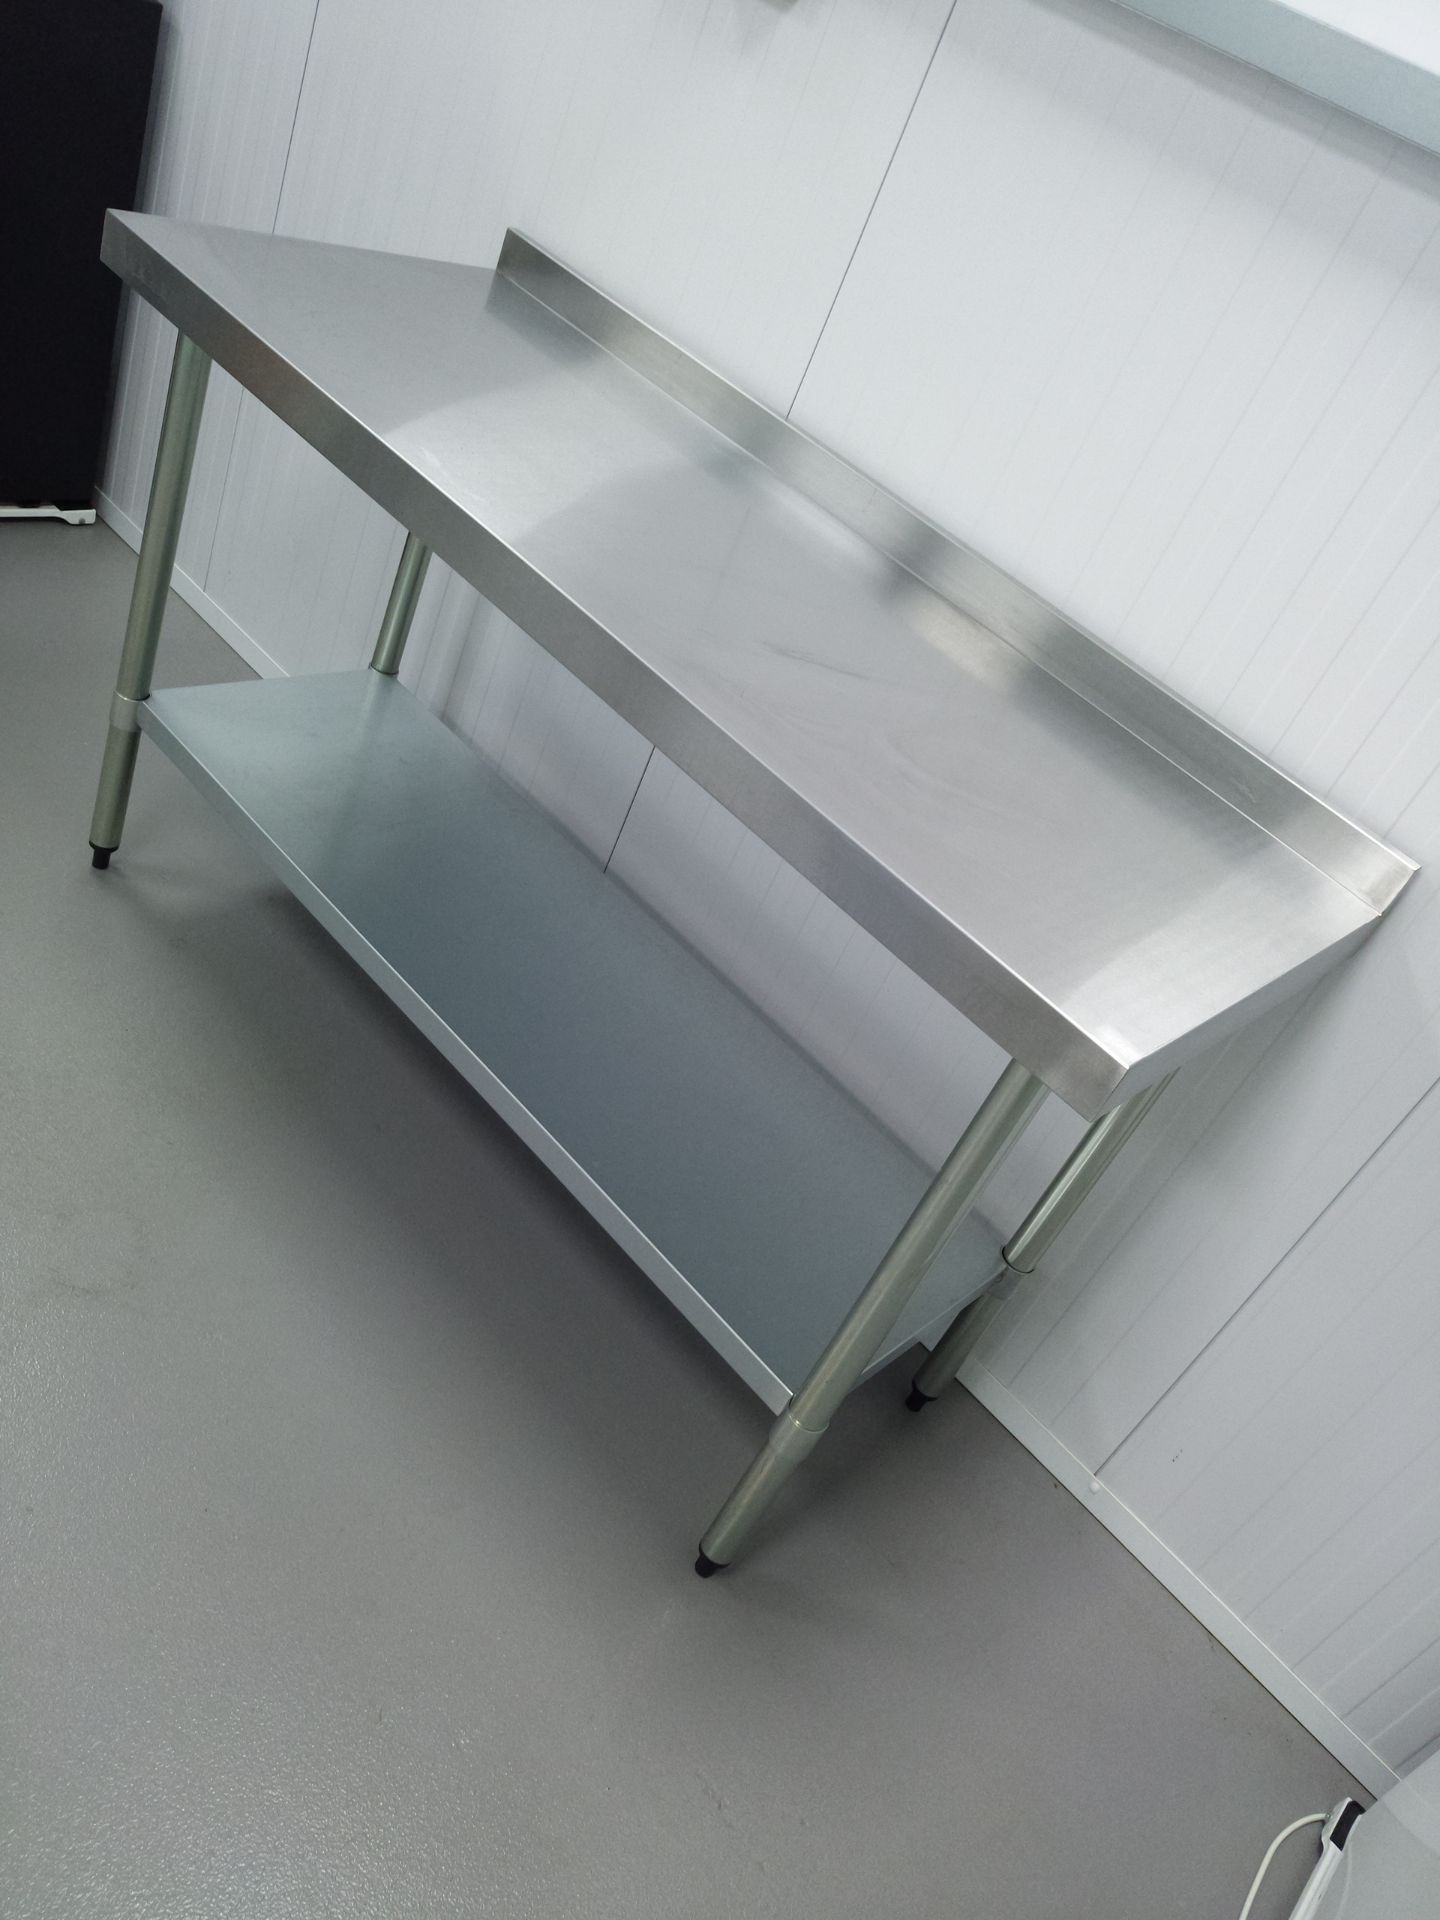 Vogue Stainless Steel Table with Upstand 1500mm - Image 2 of 2